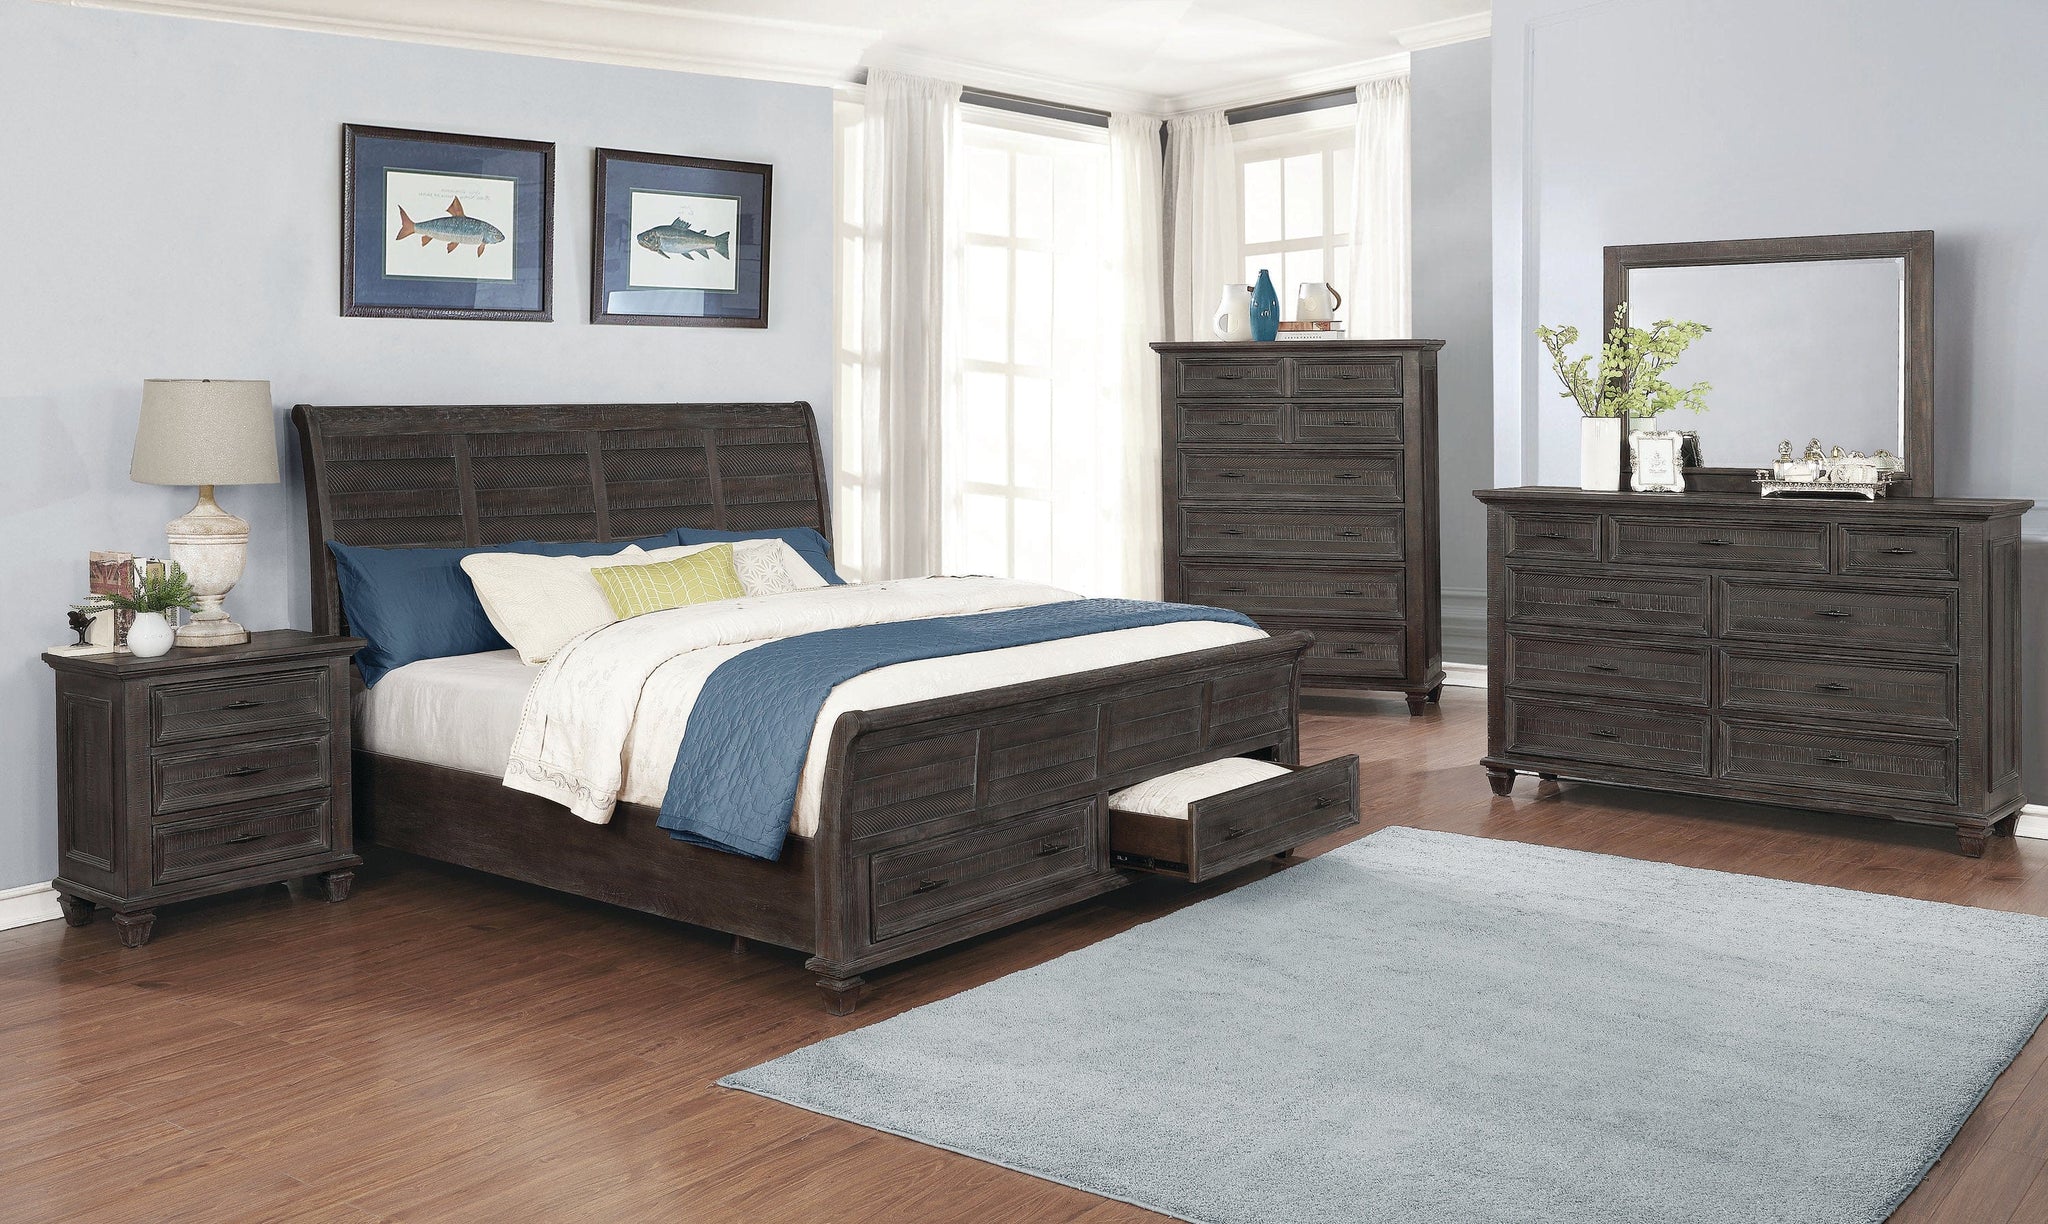 Atascadero Queen 2-Drawer Storage Bed Weathered Carbon Collection: Wine Country Inspiration Makes This Bed One To Relax And Reminisce On. Storage Drawers Add Functionality. SKU: 222880Q